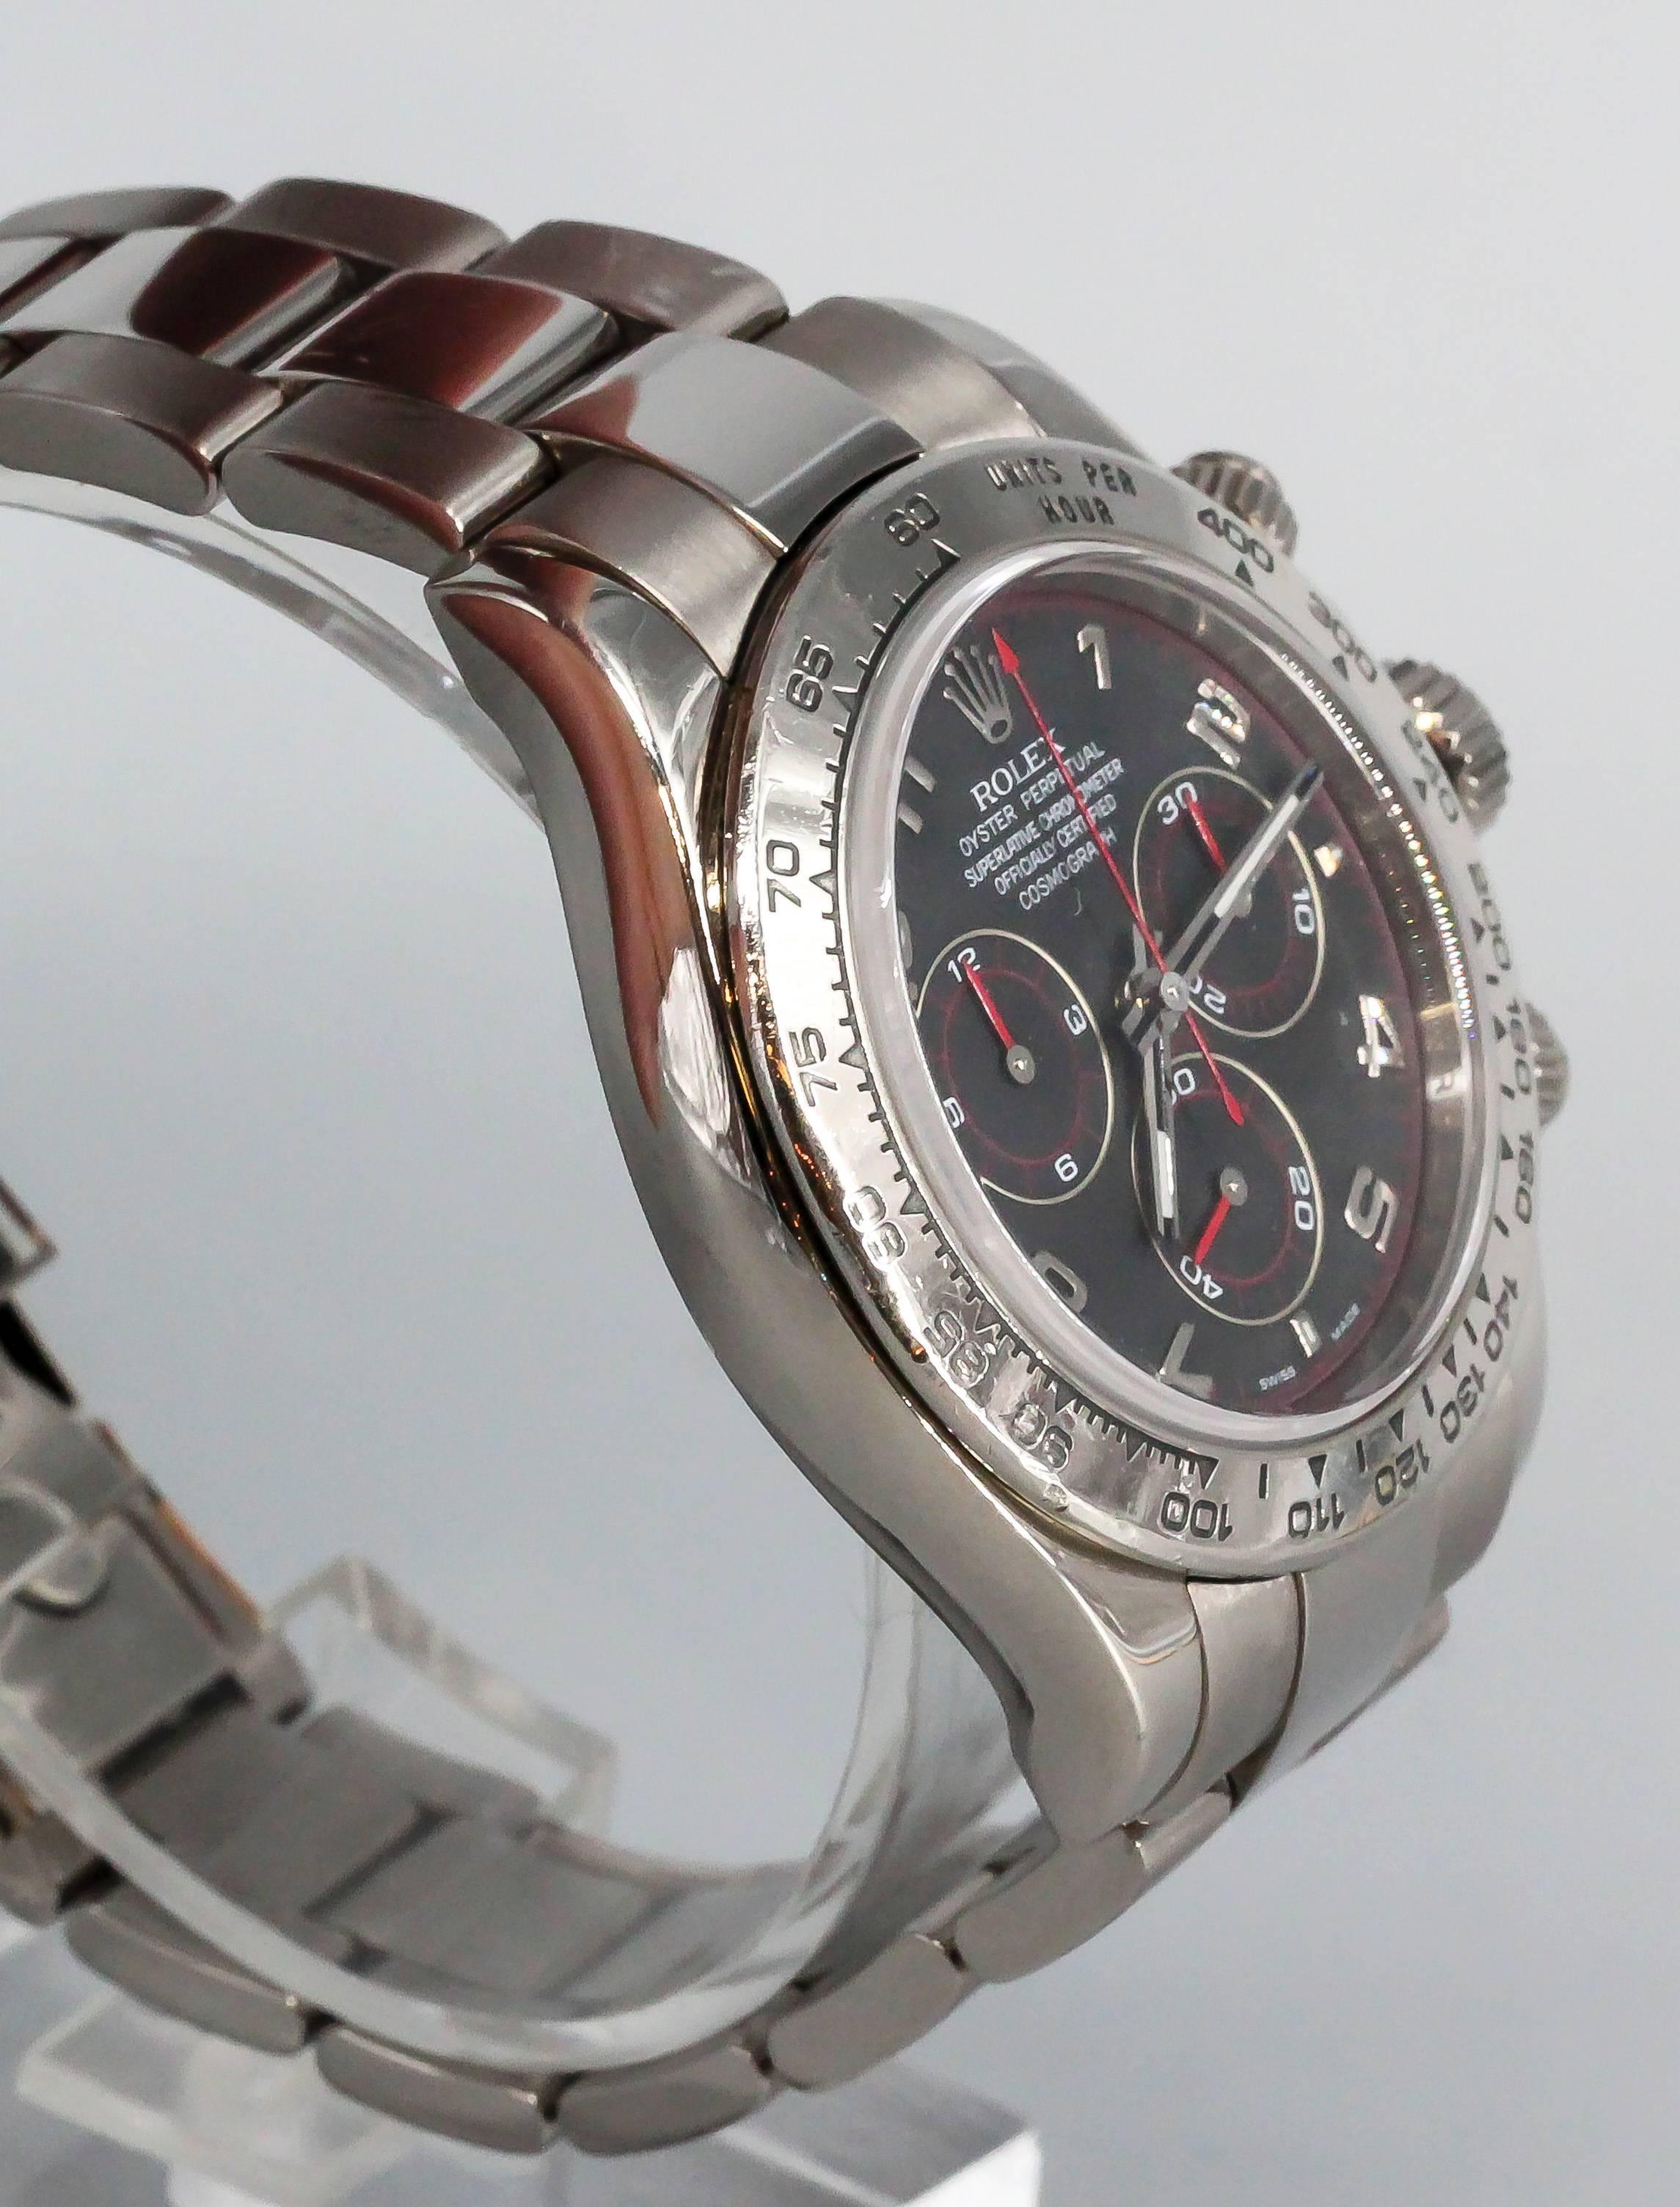 Handsome 18K white gold Rolex Cosmograph "Daytona" wrist watch. This is the "Z" series with the inscribed inner bezel. Automatic movement. Beautiful black dial with red accents. Comes with Rolex 18K white gold link bracelet and